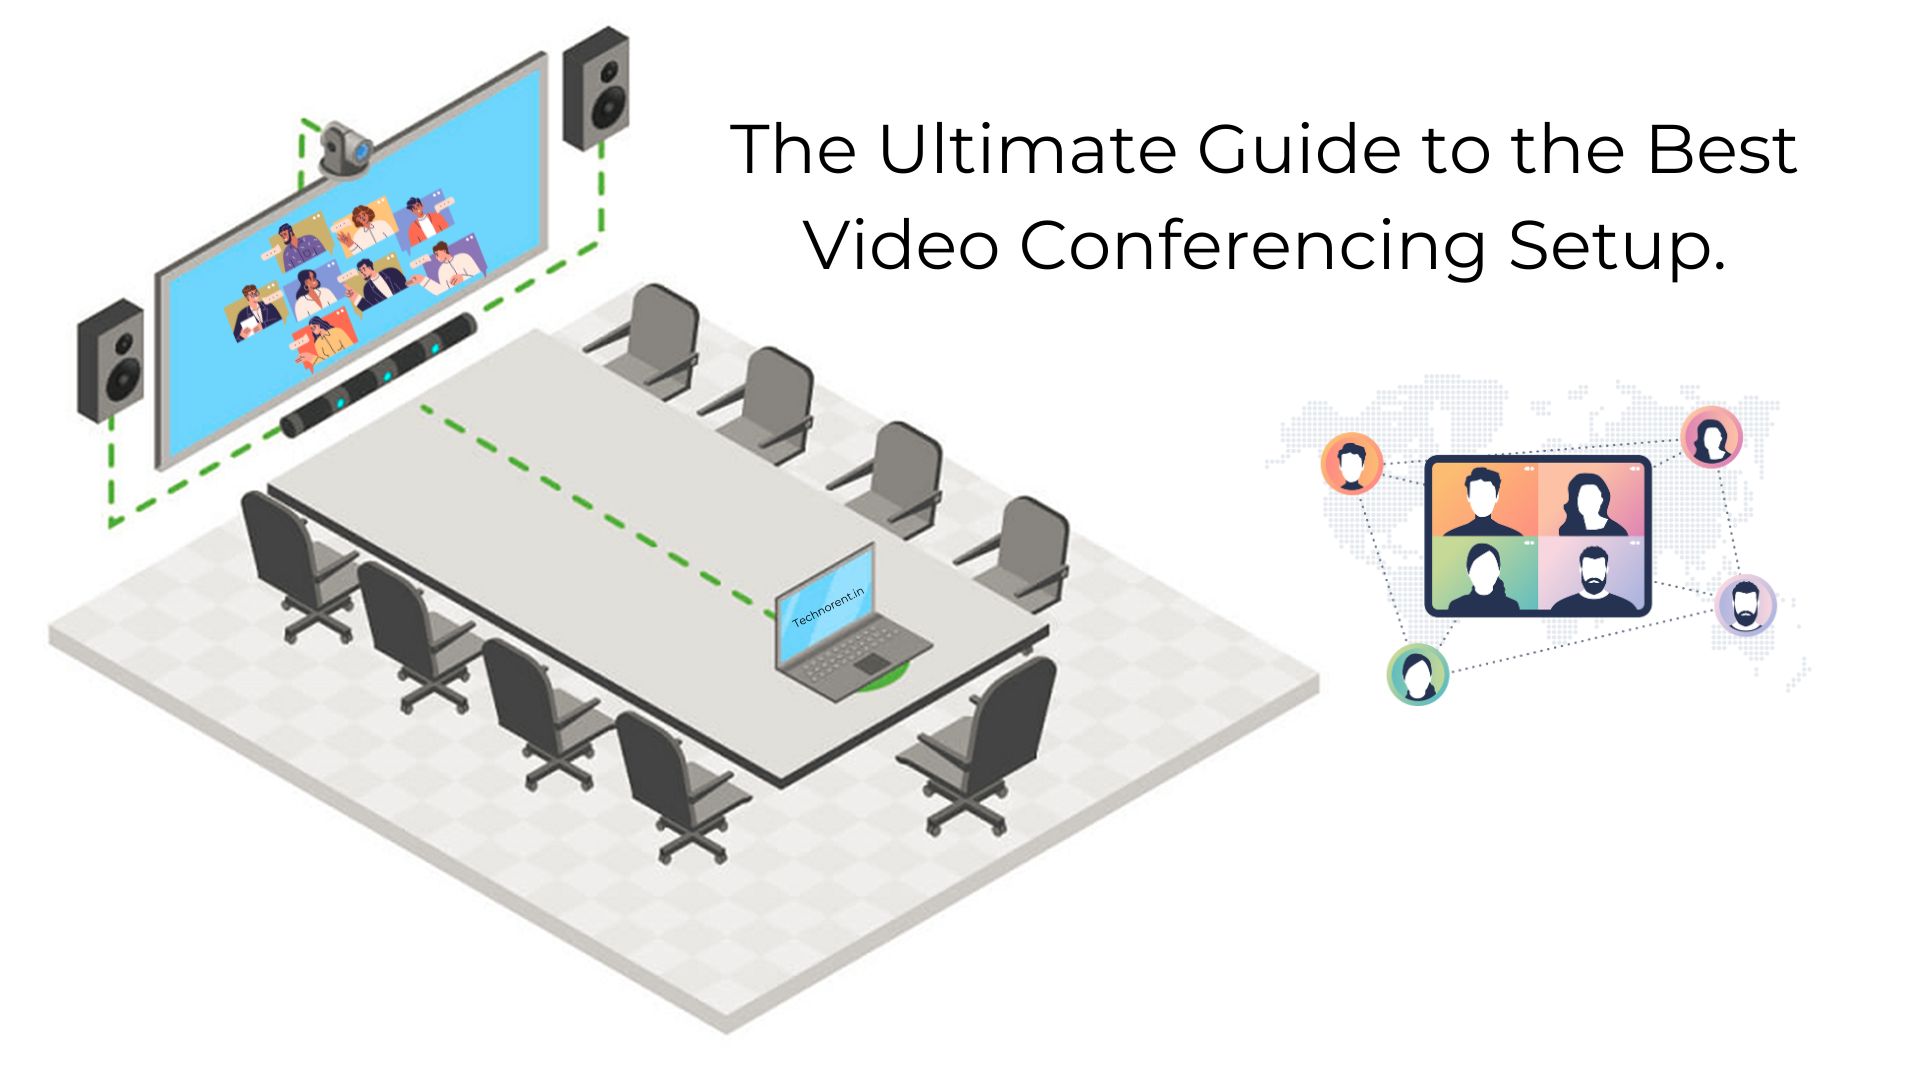 The Ultimate Guide to the Best Video Conferencing Setup.